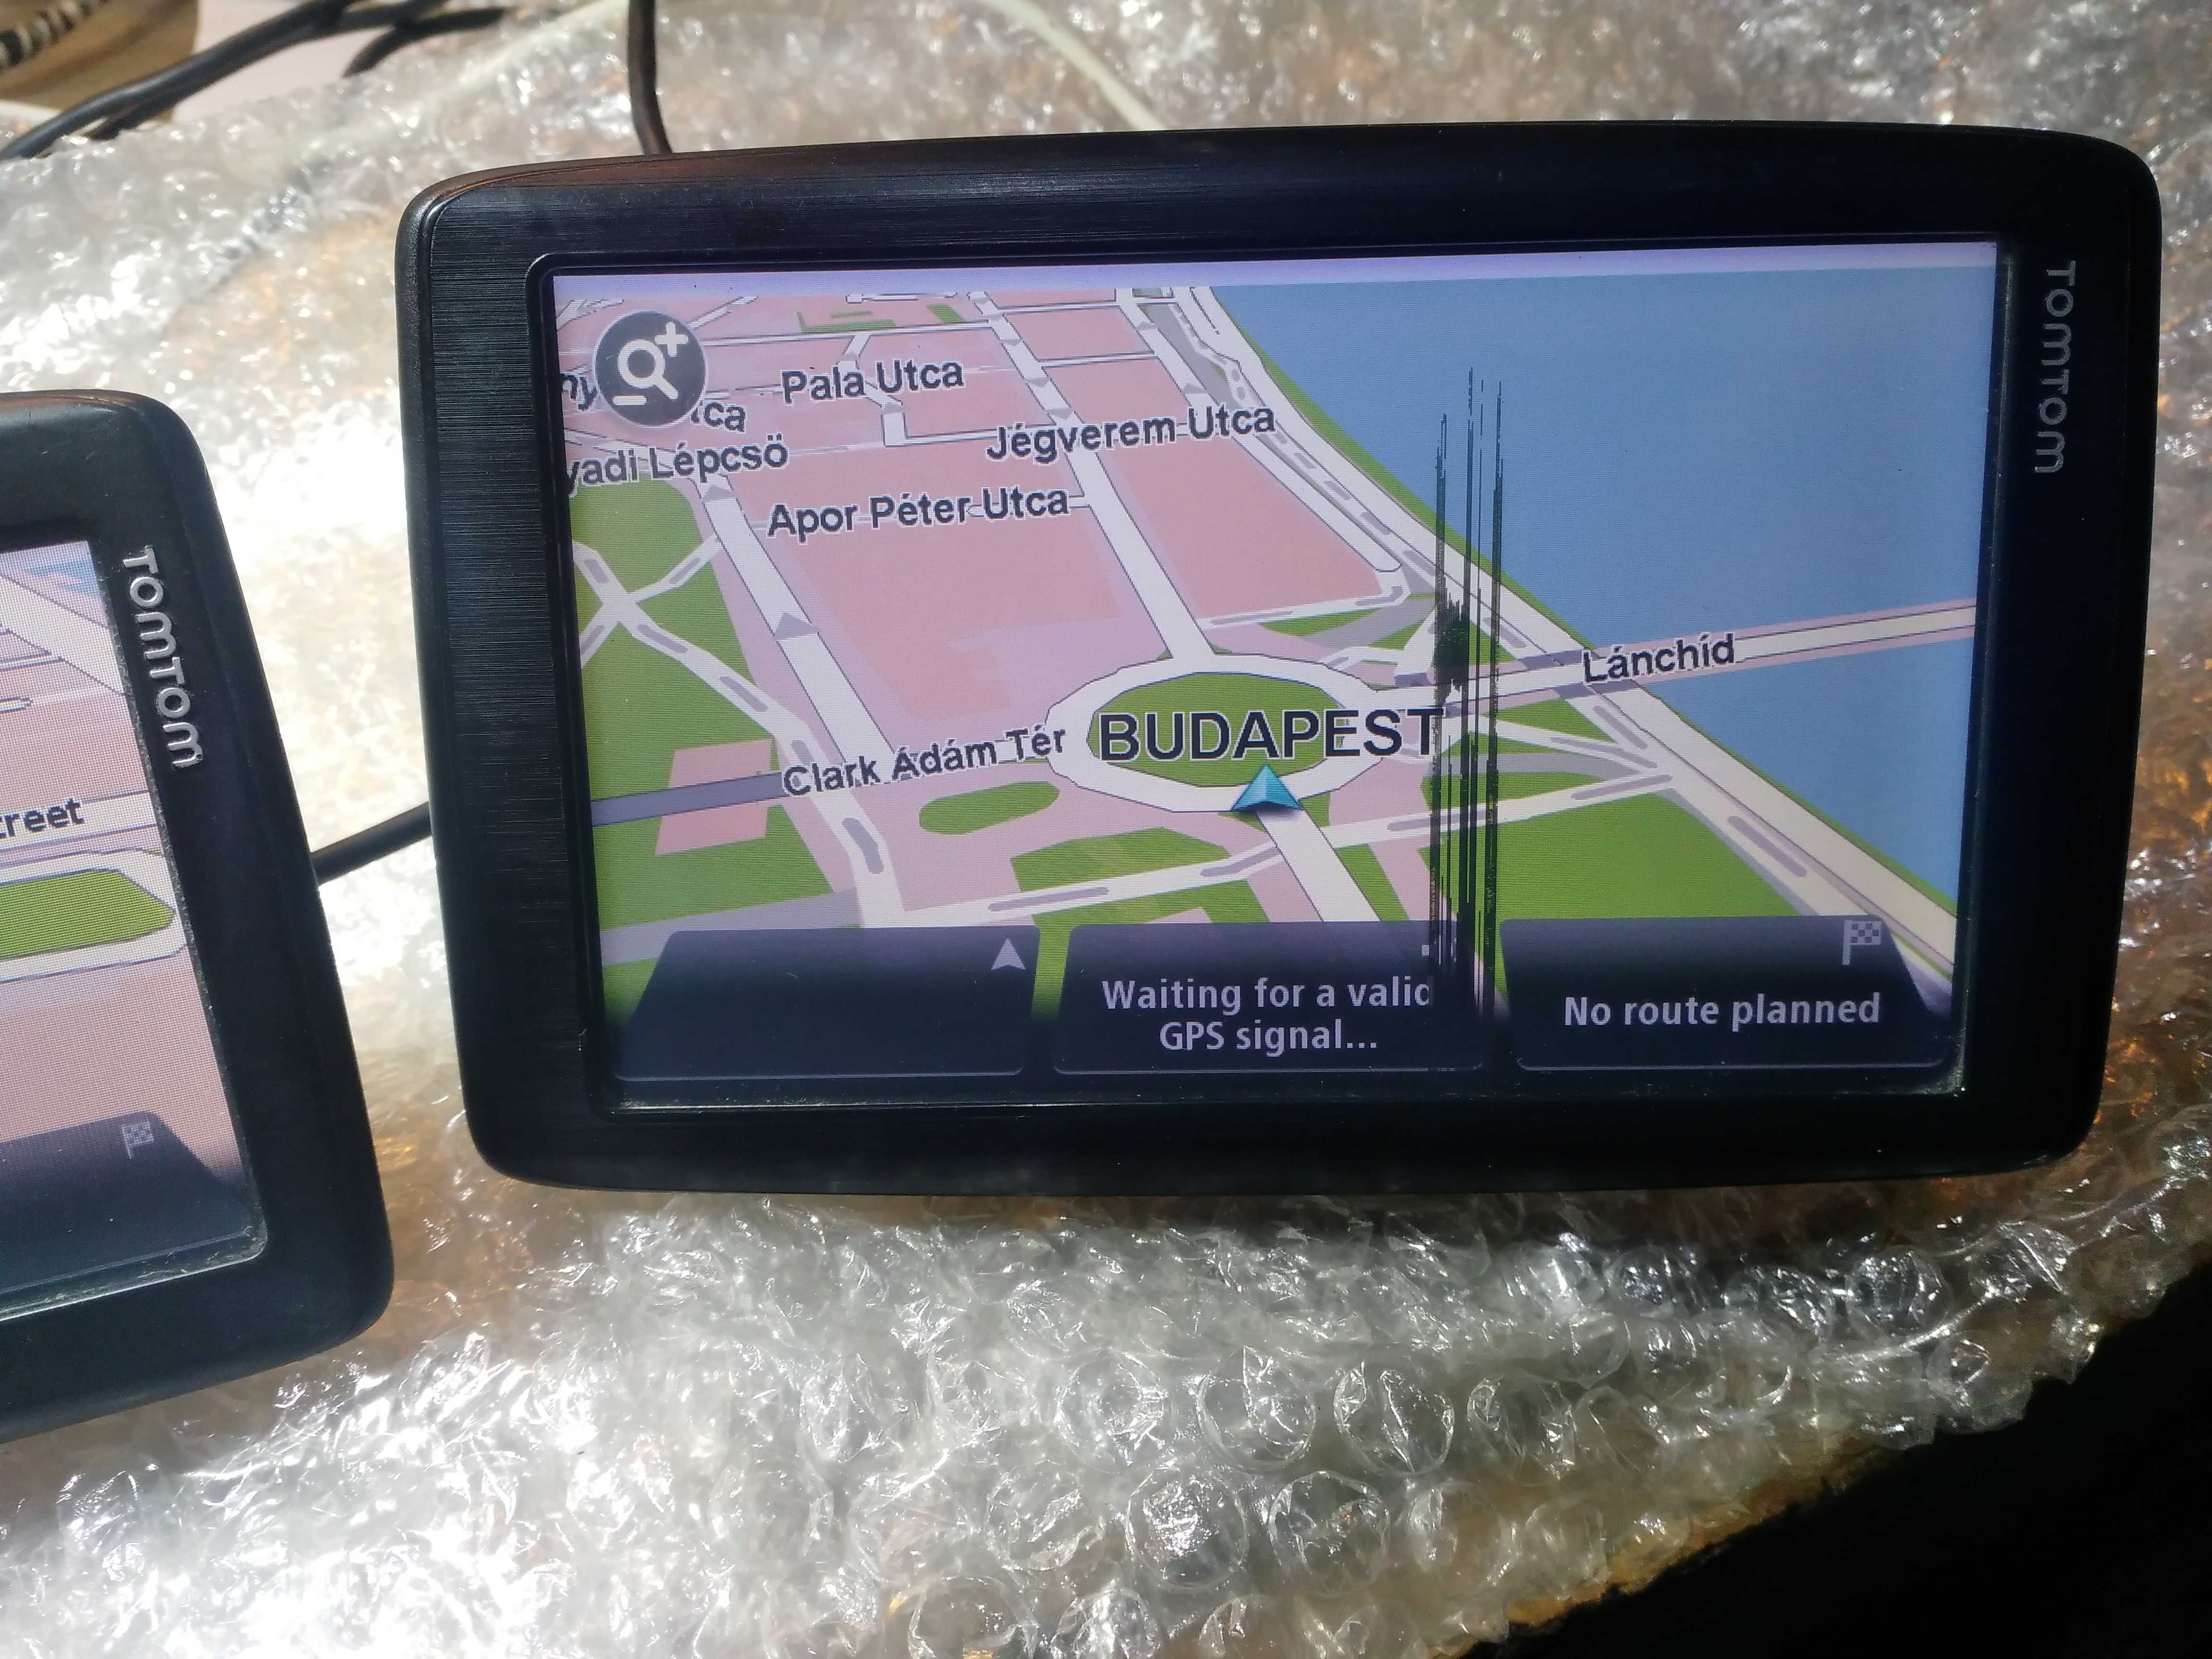 TomTom camion de 6 si 5 inch ultimele harti